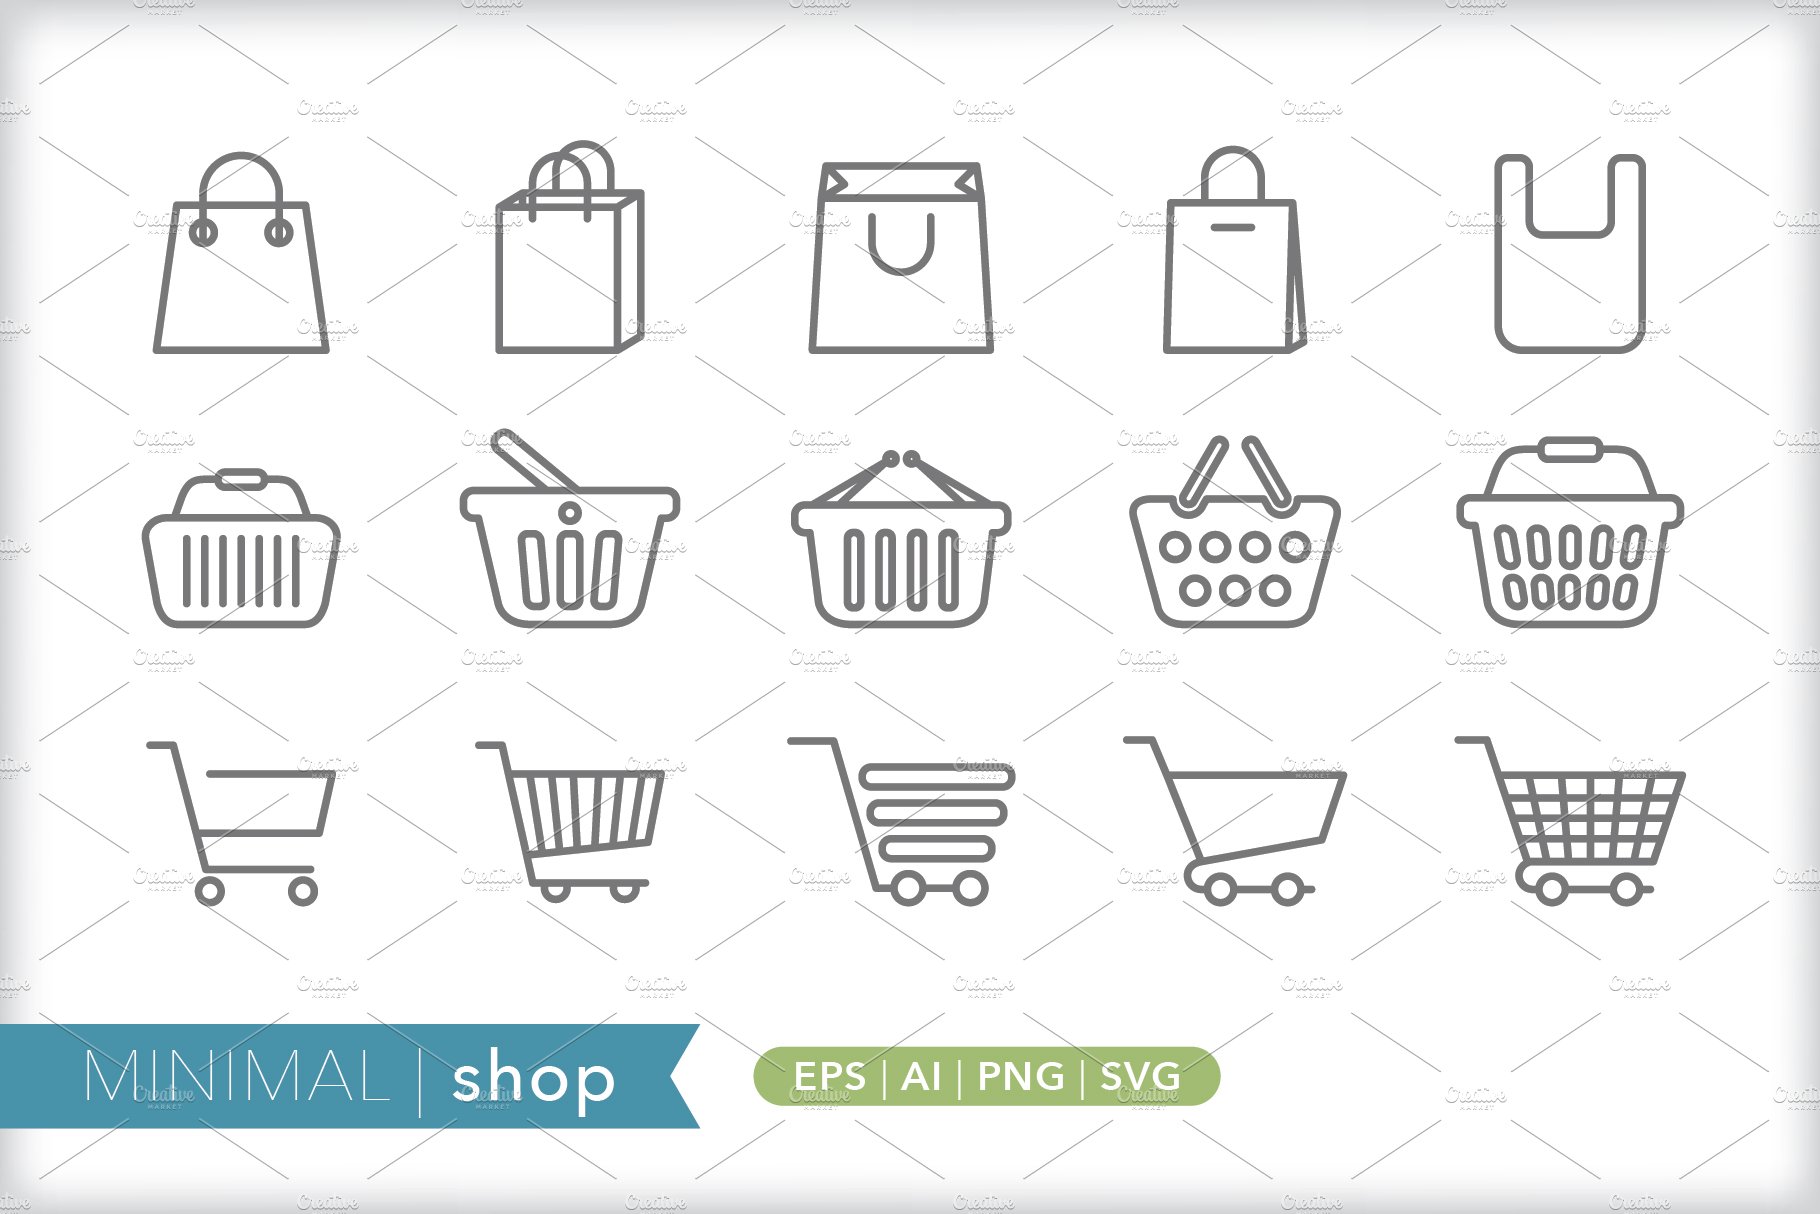 Minimal shop icons cover image.